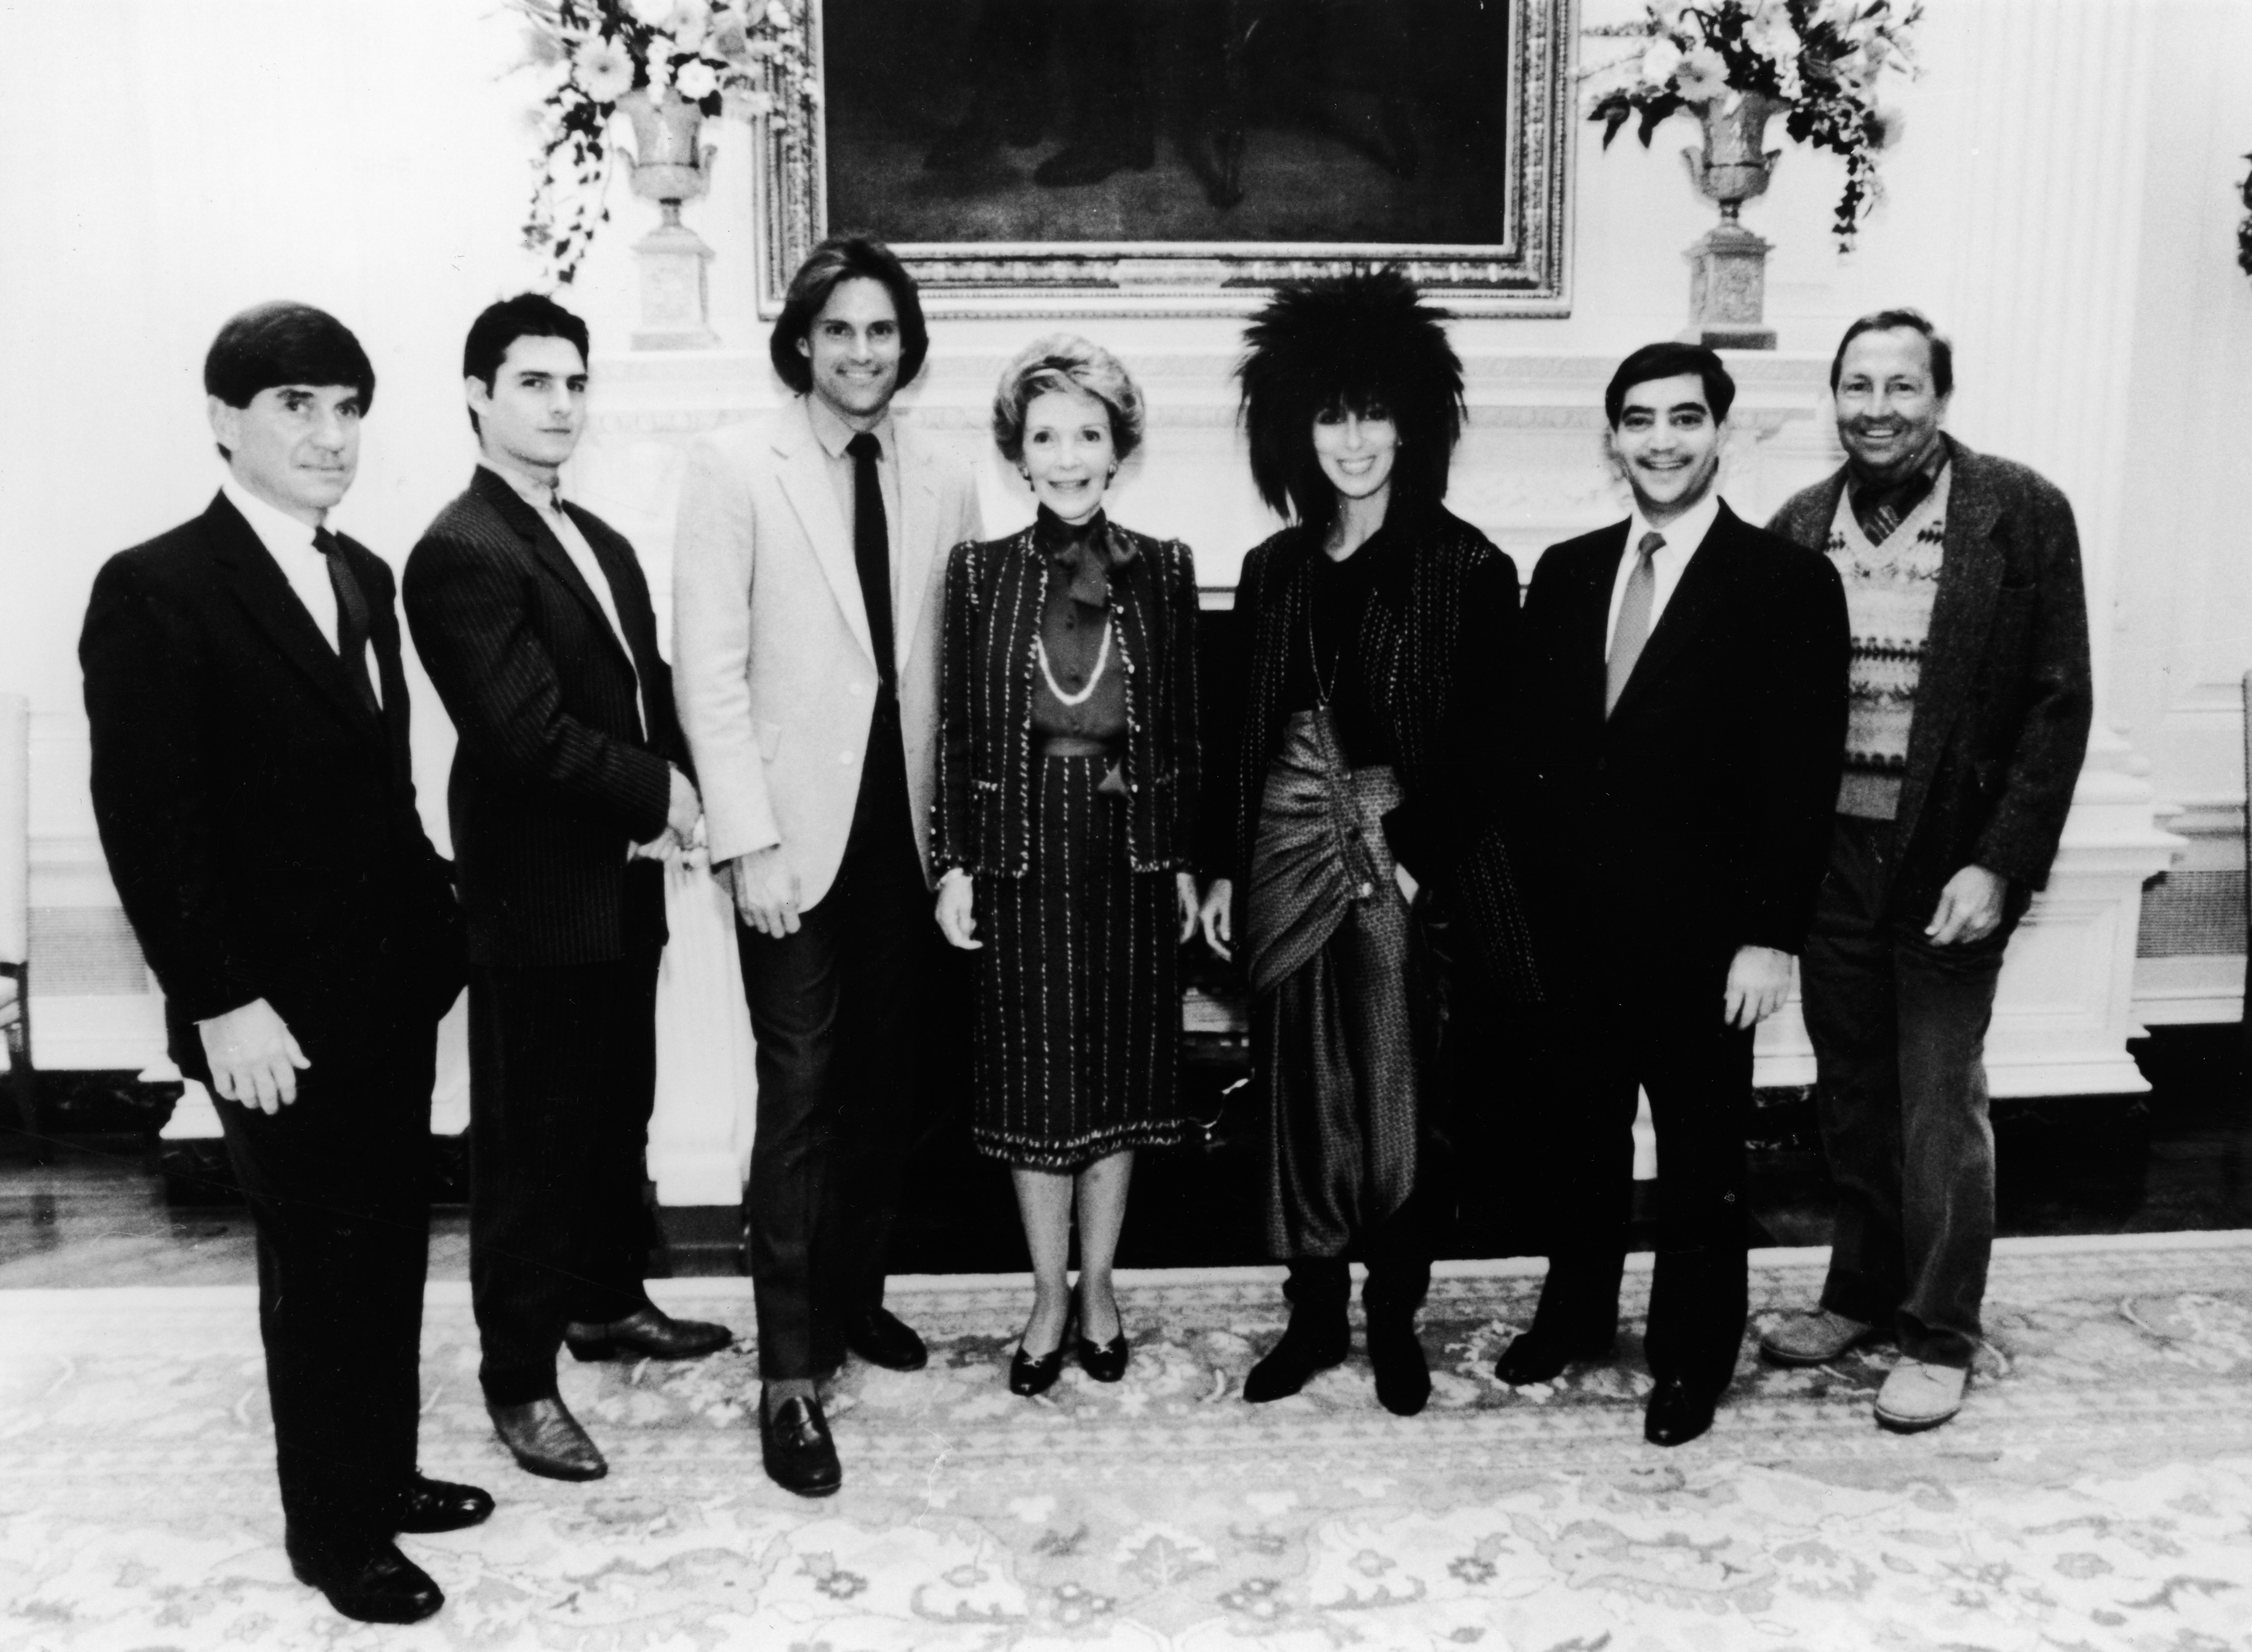 (L- R): G. Chris Anderson, Tom Cruise, Bruce Jenner, First Lady Nancy Reagan, Cher, Richard C. Strauss, and Robert Rauchenberg, at the White House on October 1, 1985 in Washington, DC | Source: Getty Images